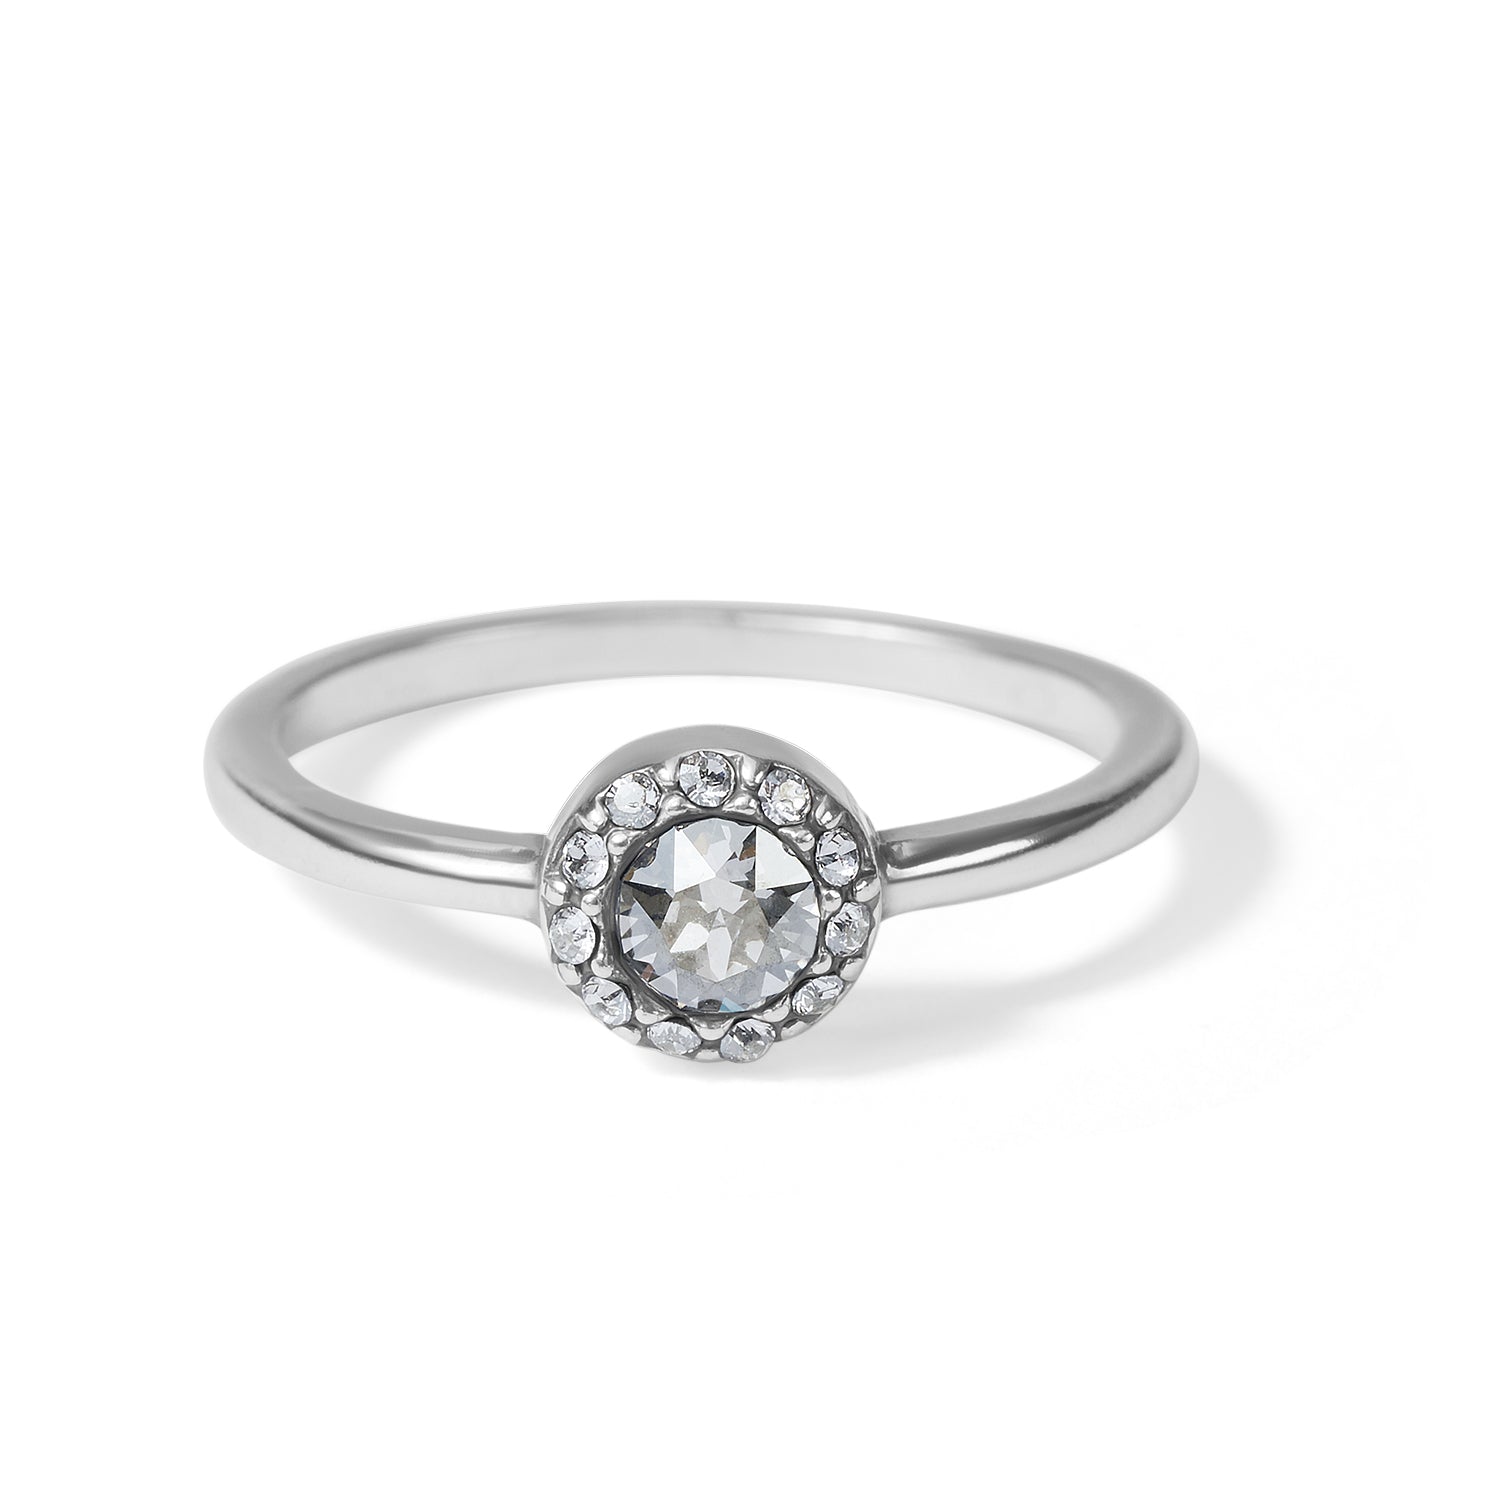 Illumina Solitaire Ring - Size 10 Front View